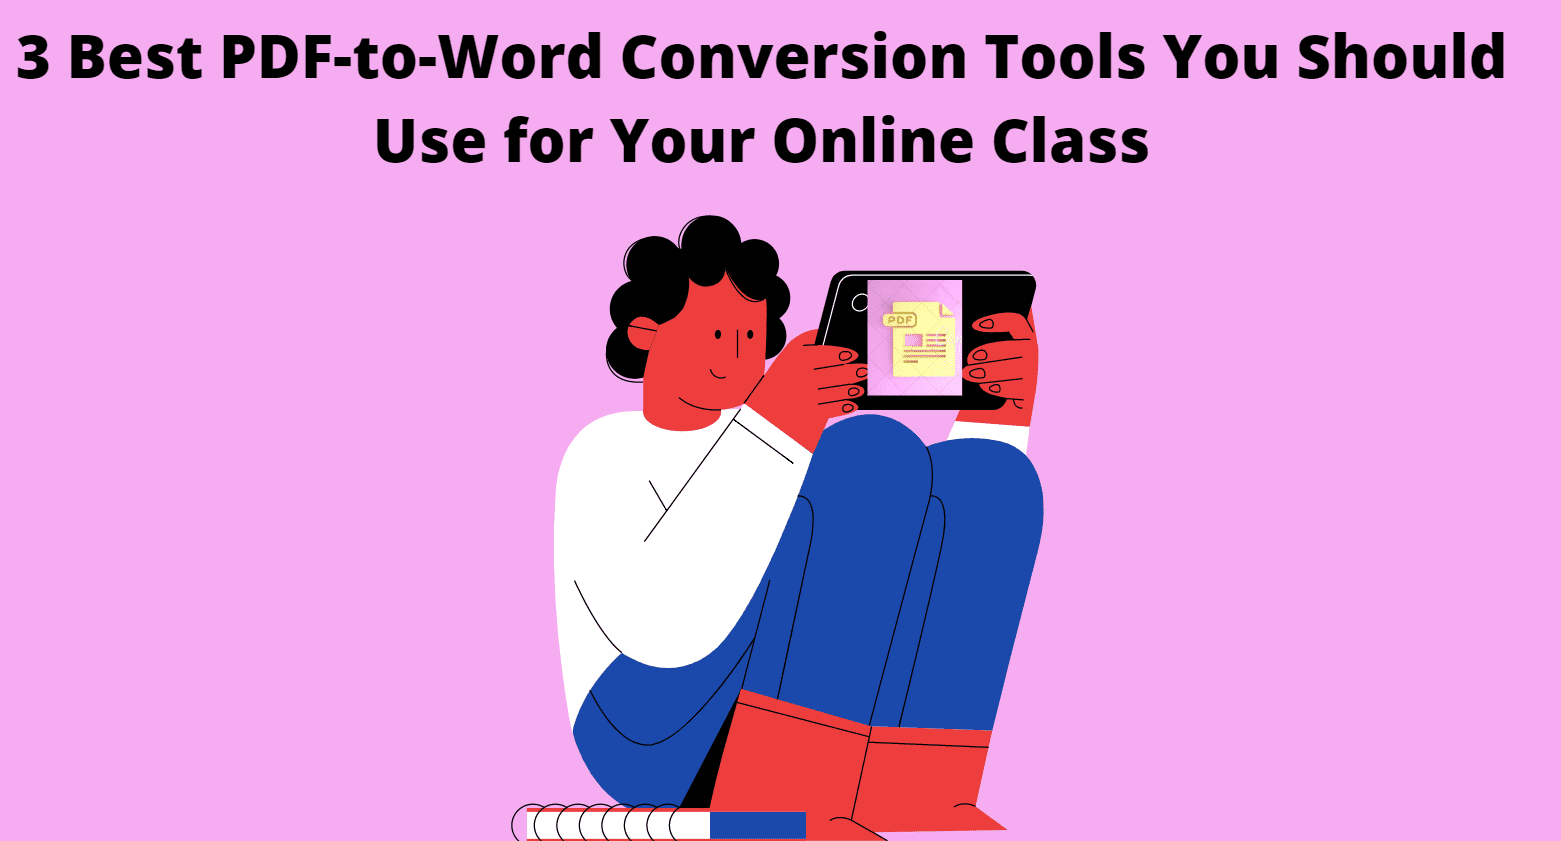 3 Best PDF-to-Word Conversion Tools You Should Use for Your Online Class